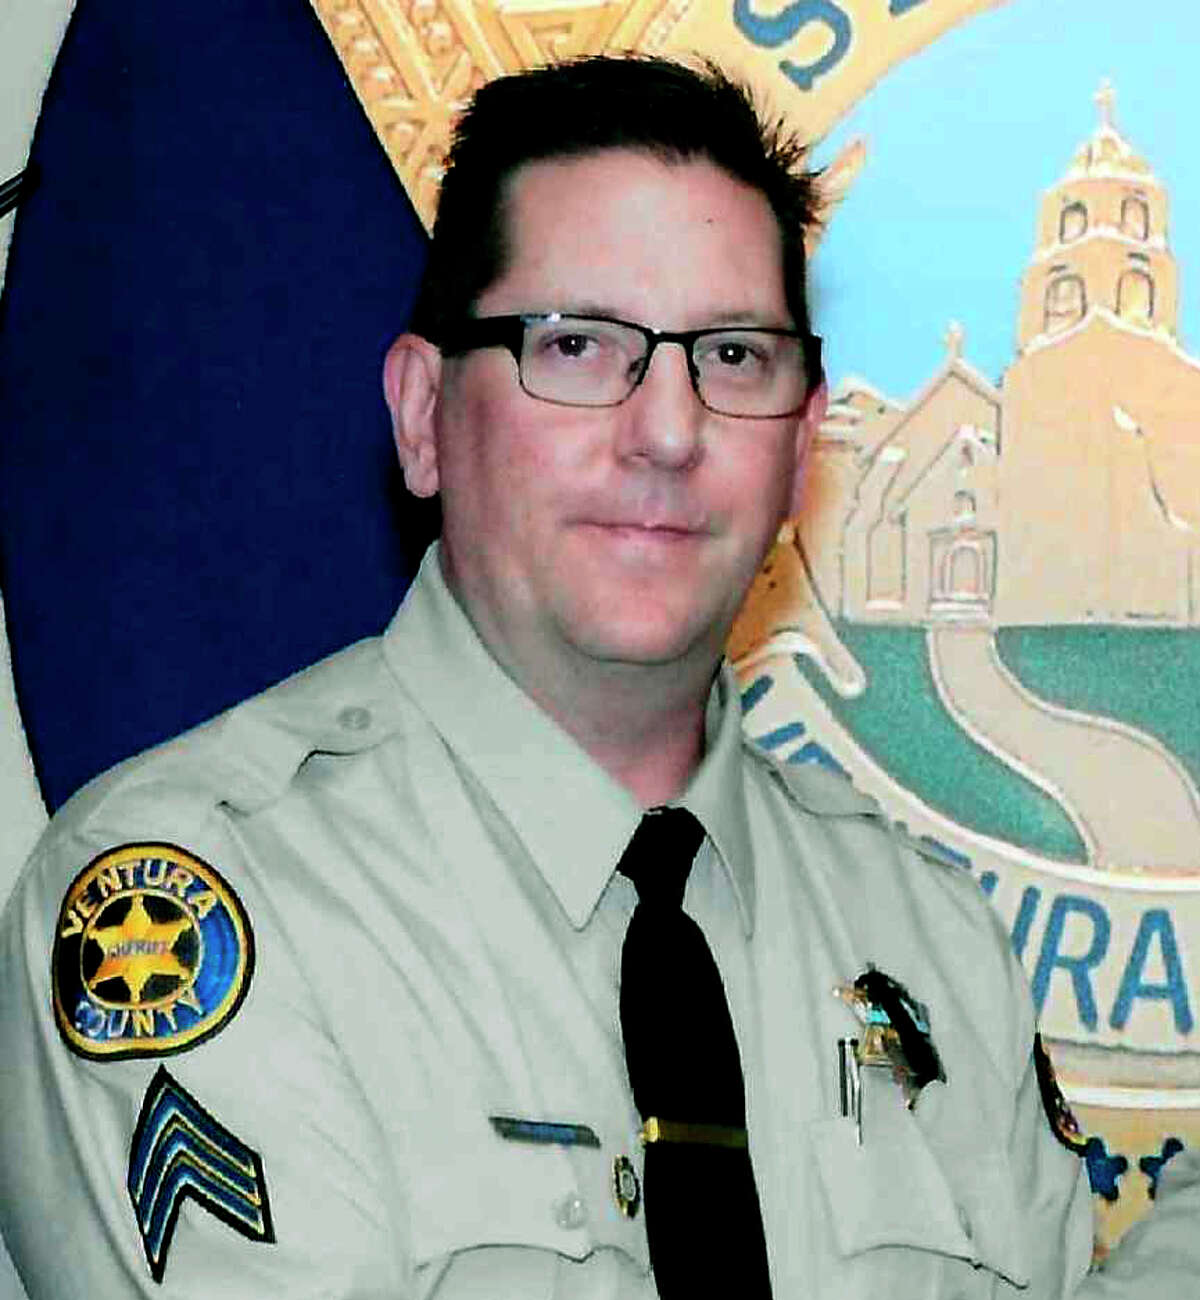 This undated photo provided by the Ventura County Sheriff's Department shows Sheriff's Sgt. Ron Helus, who was killed Wednesday, Nov. 7, 2018, in a deadly shooting at a country music bar in Thousand Oaks, Calif. (Ventura County Sheriff's Department via AP)